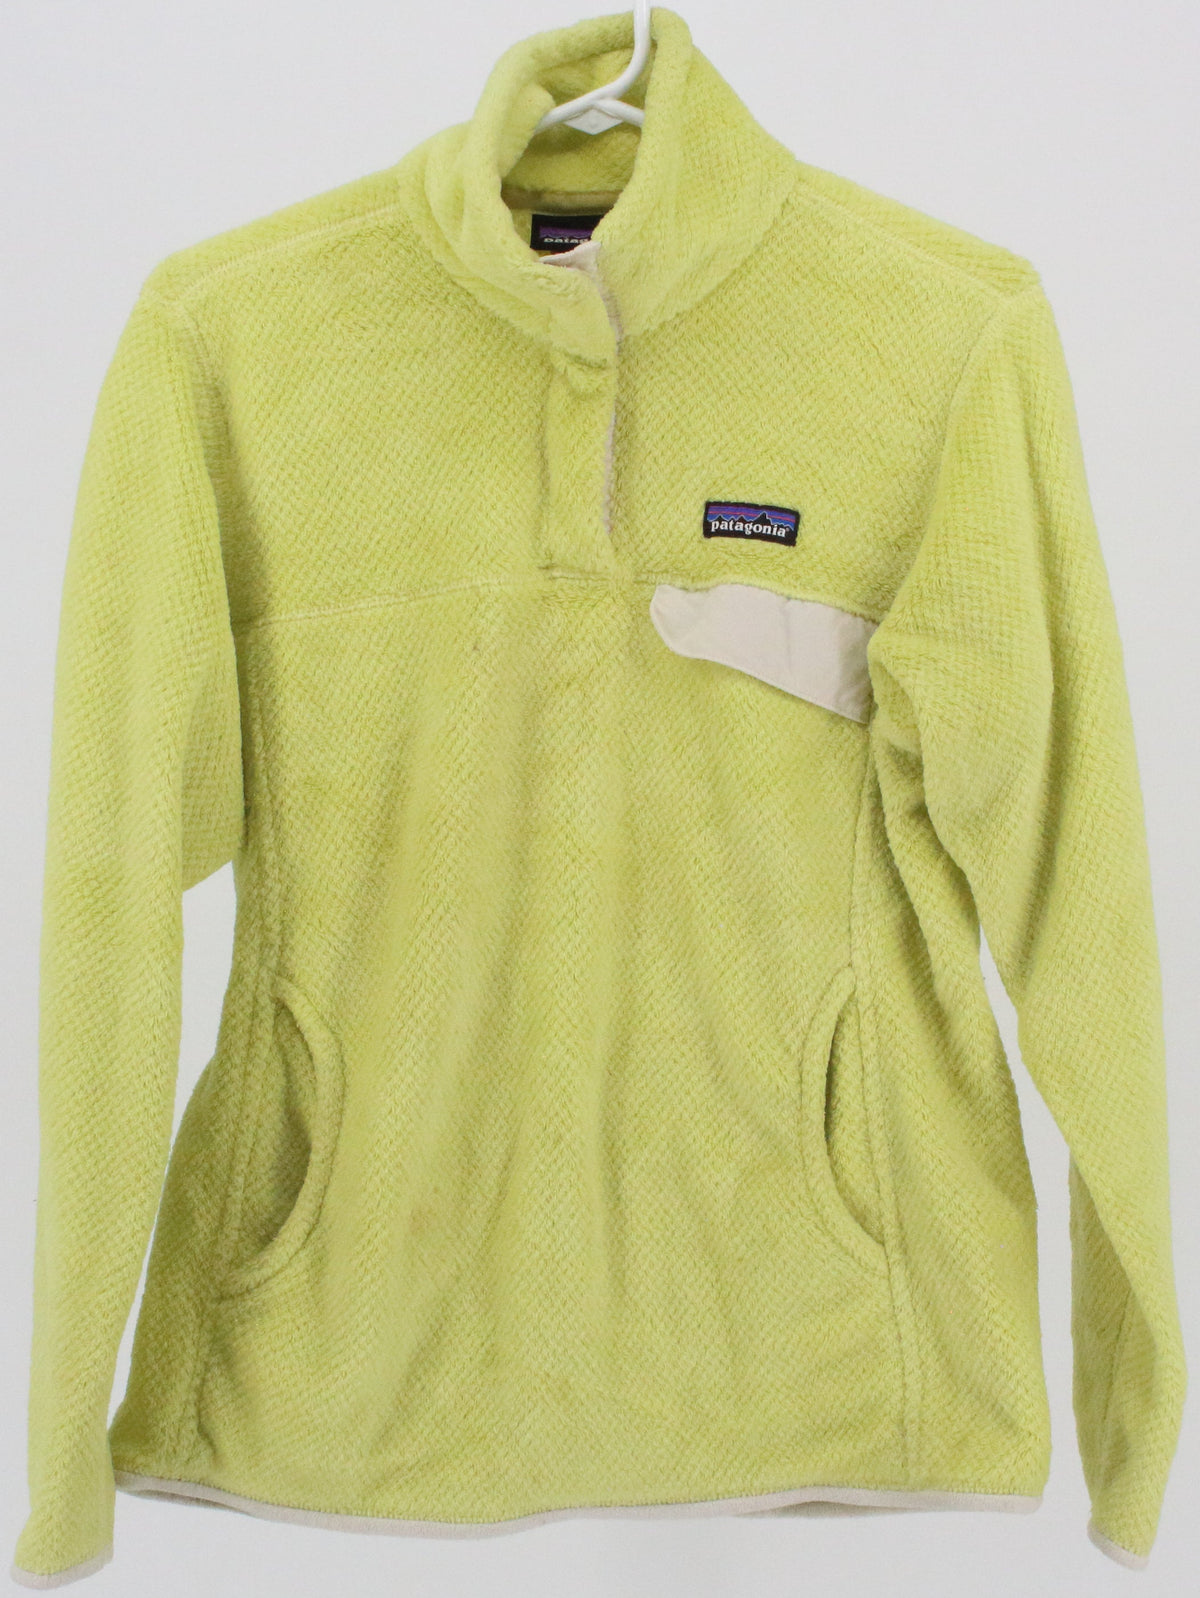 Patagonia Yellow and Off White Front Pocket Women's Fleece